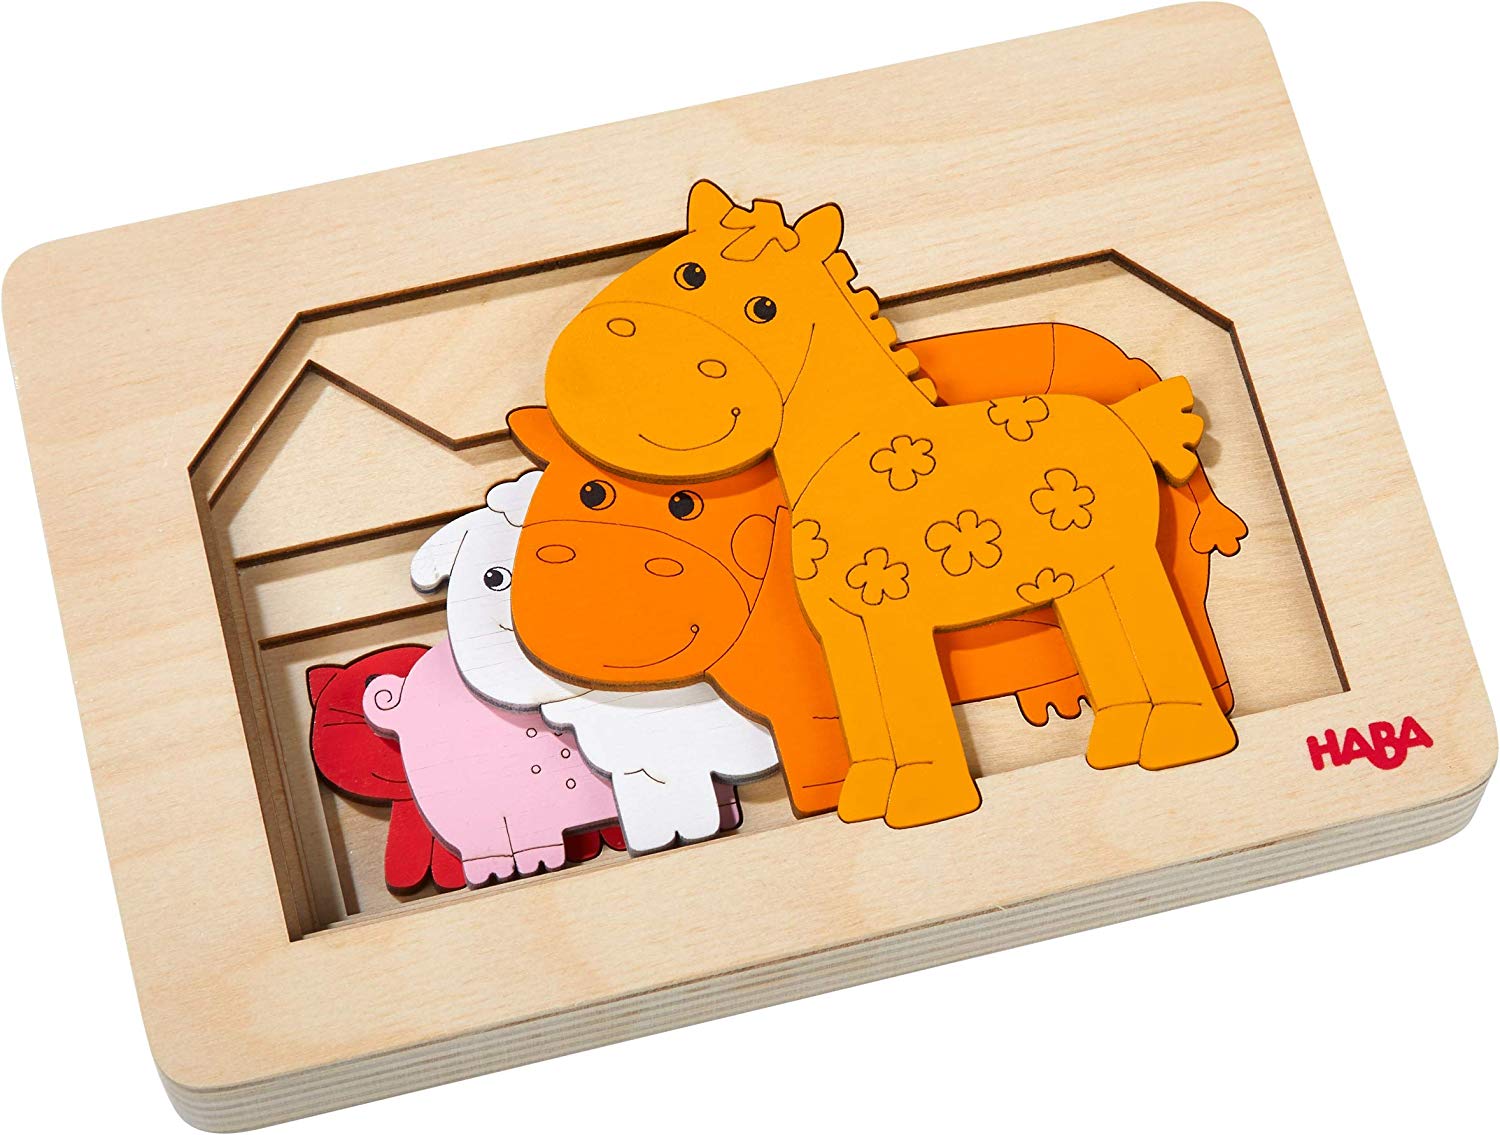 Haba 304611 Wooden Puzzle Farm Animals 5-Piece Layer Puzzle With Animal Mot